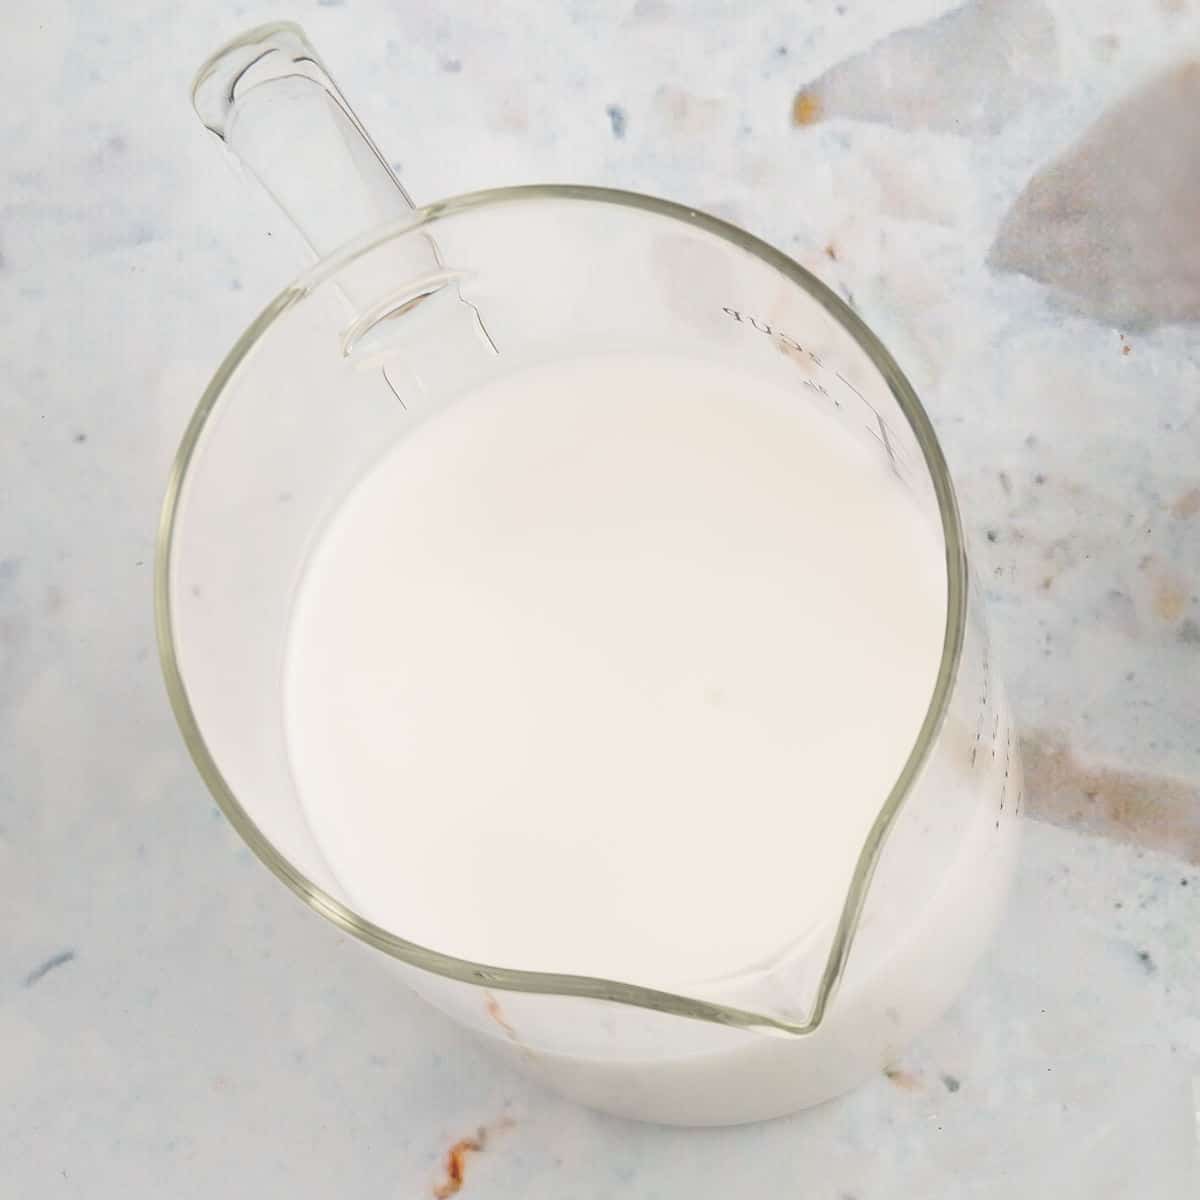 A glass measuring cup for fluid ounces and cups filled with non-dairy milk.